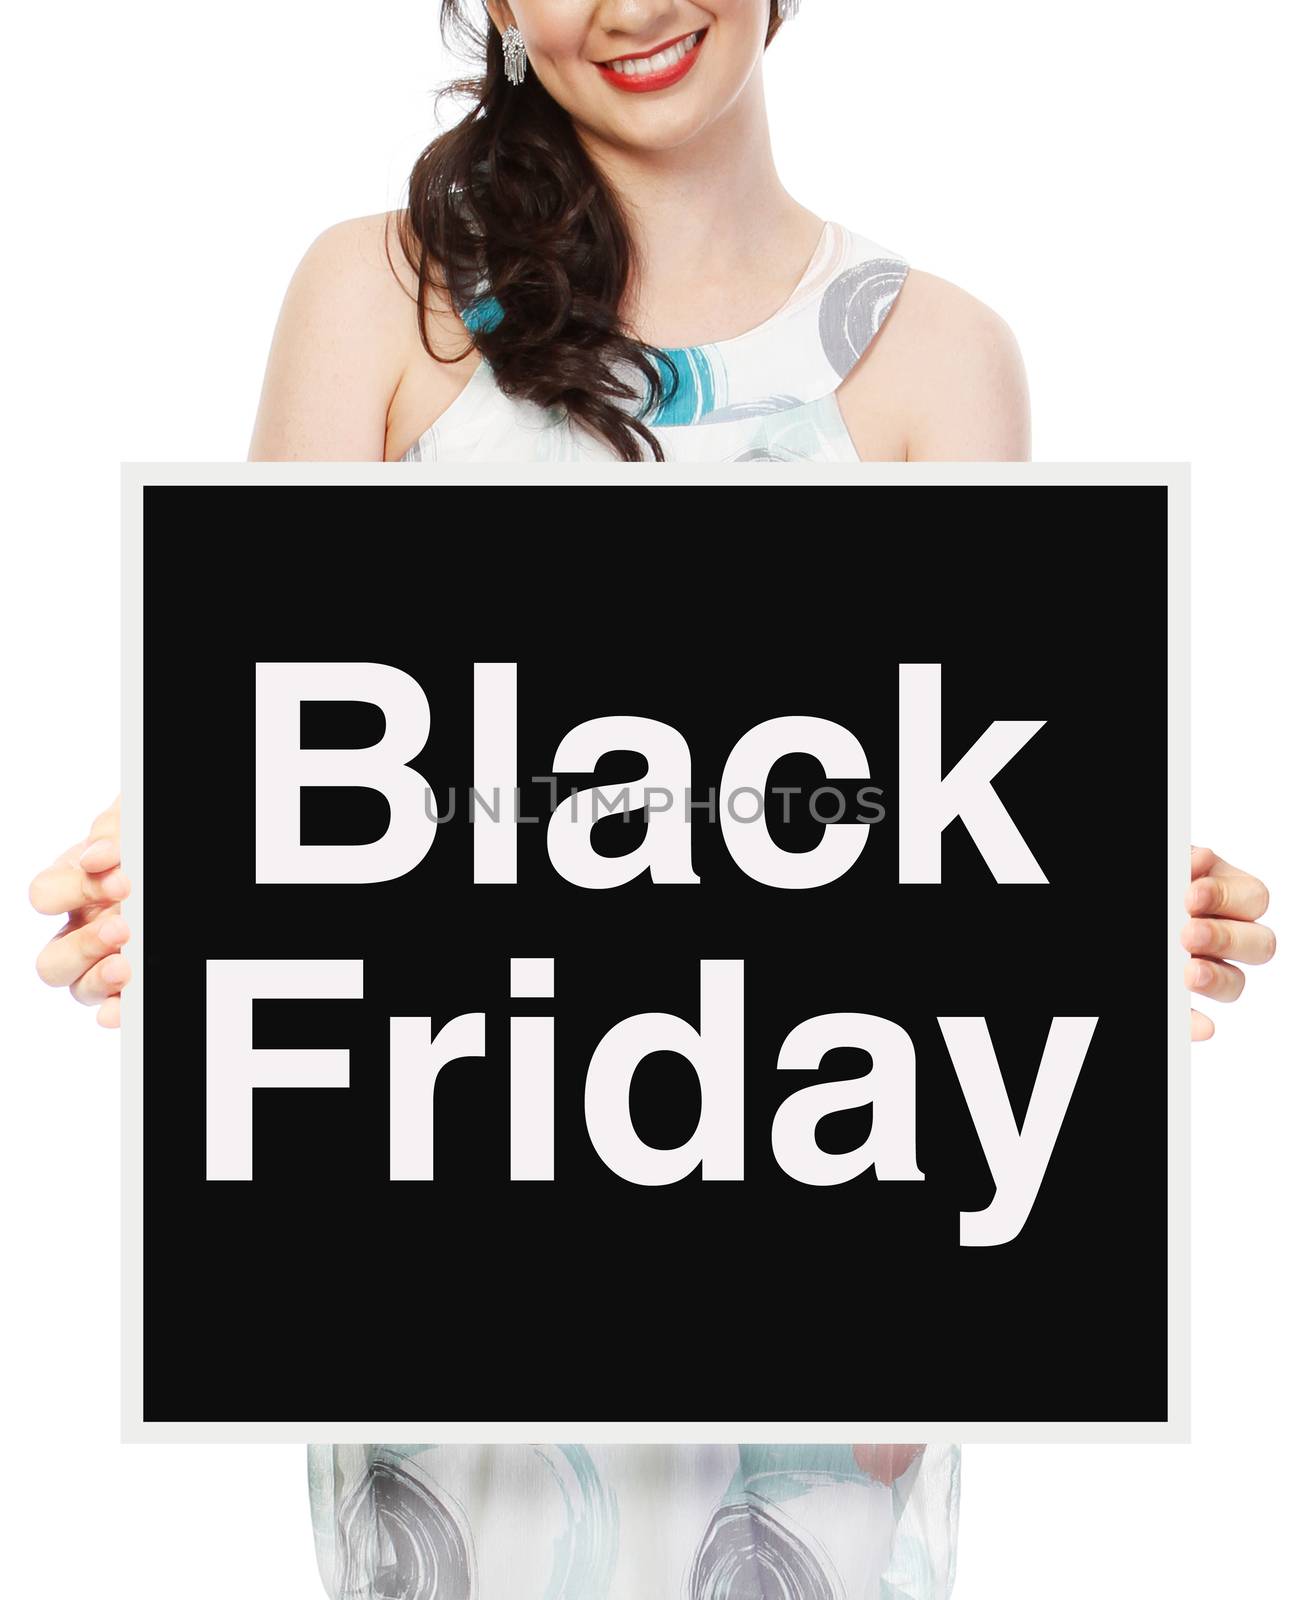 A woman holding a Black Friday sale signboard